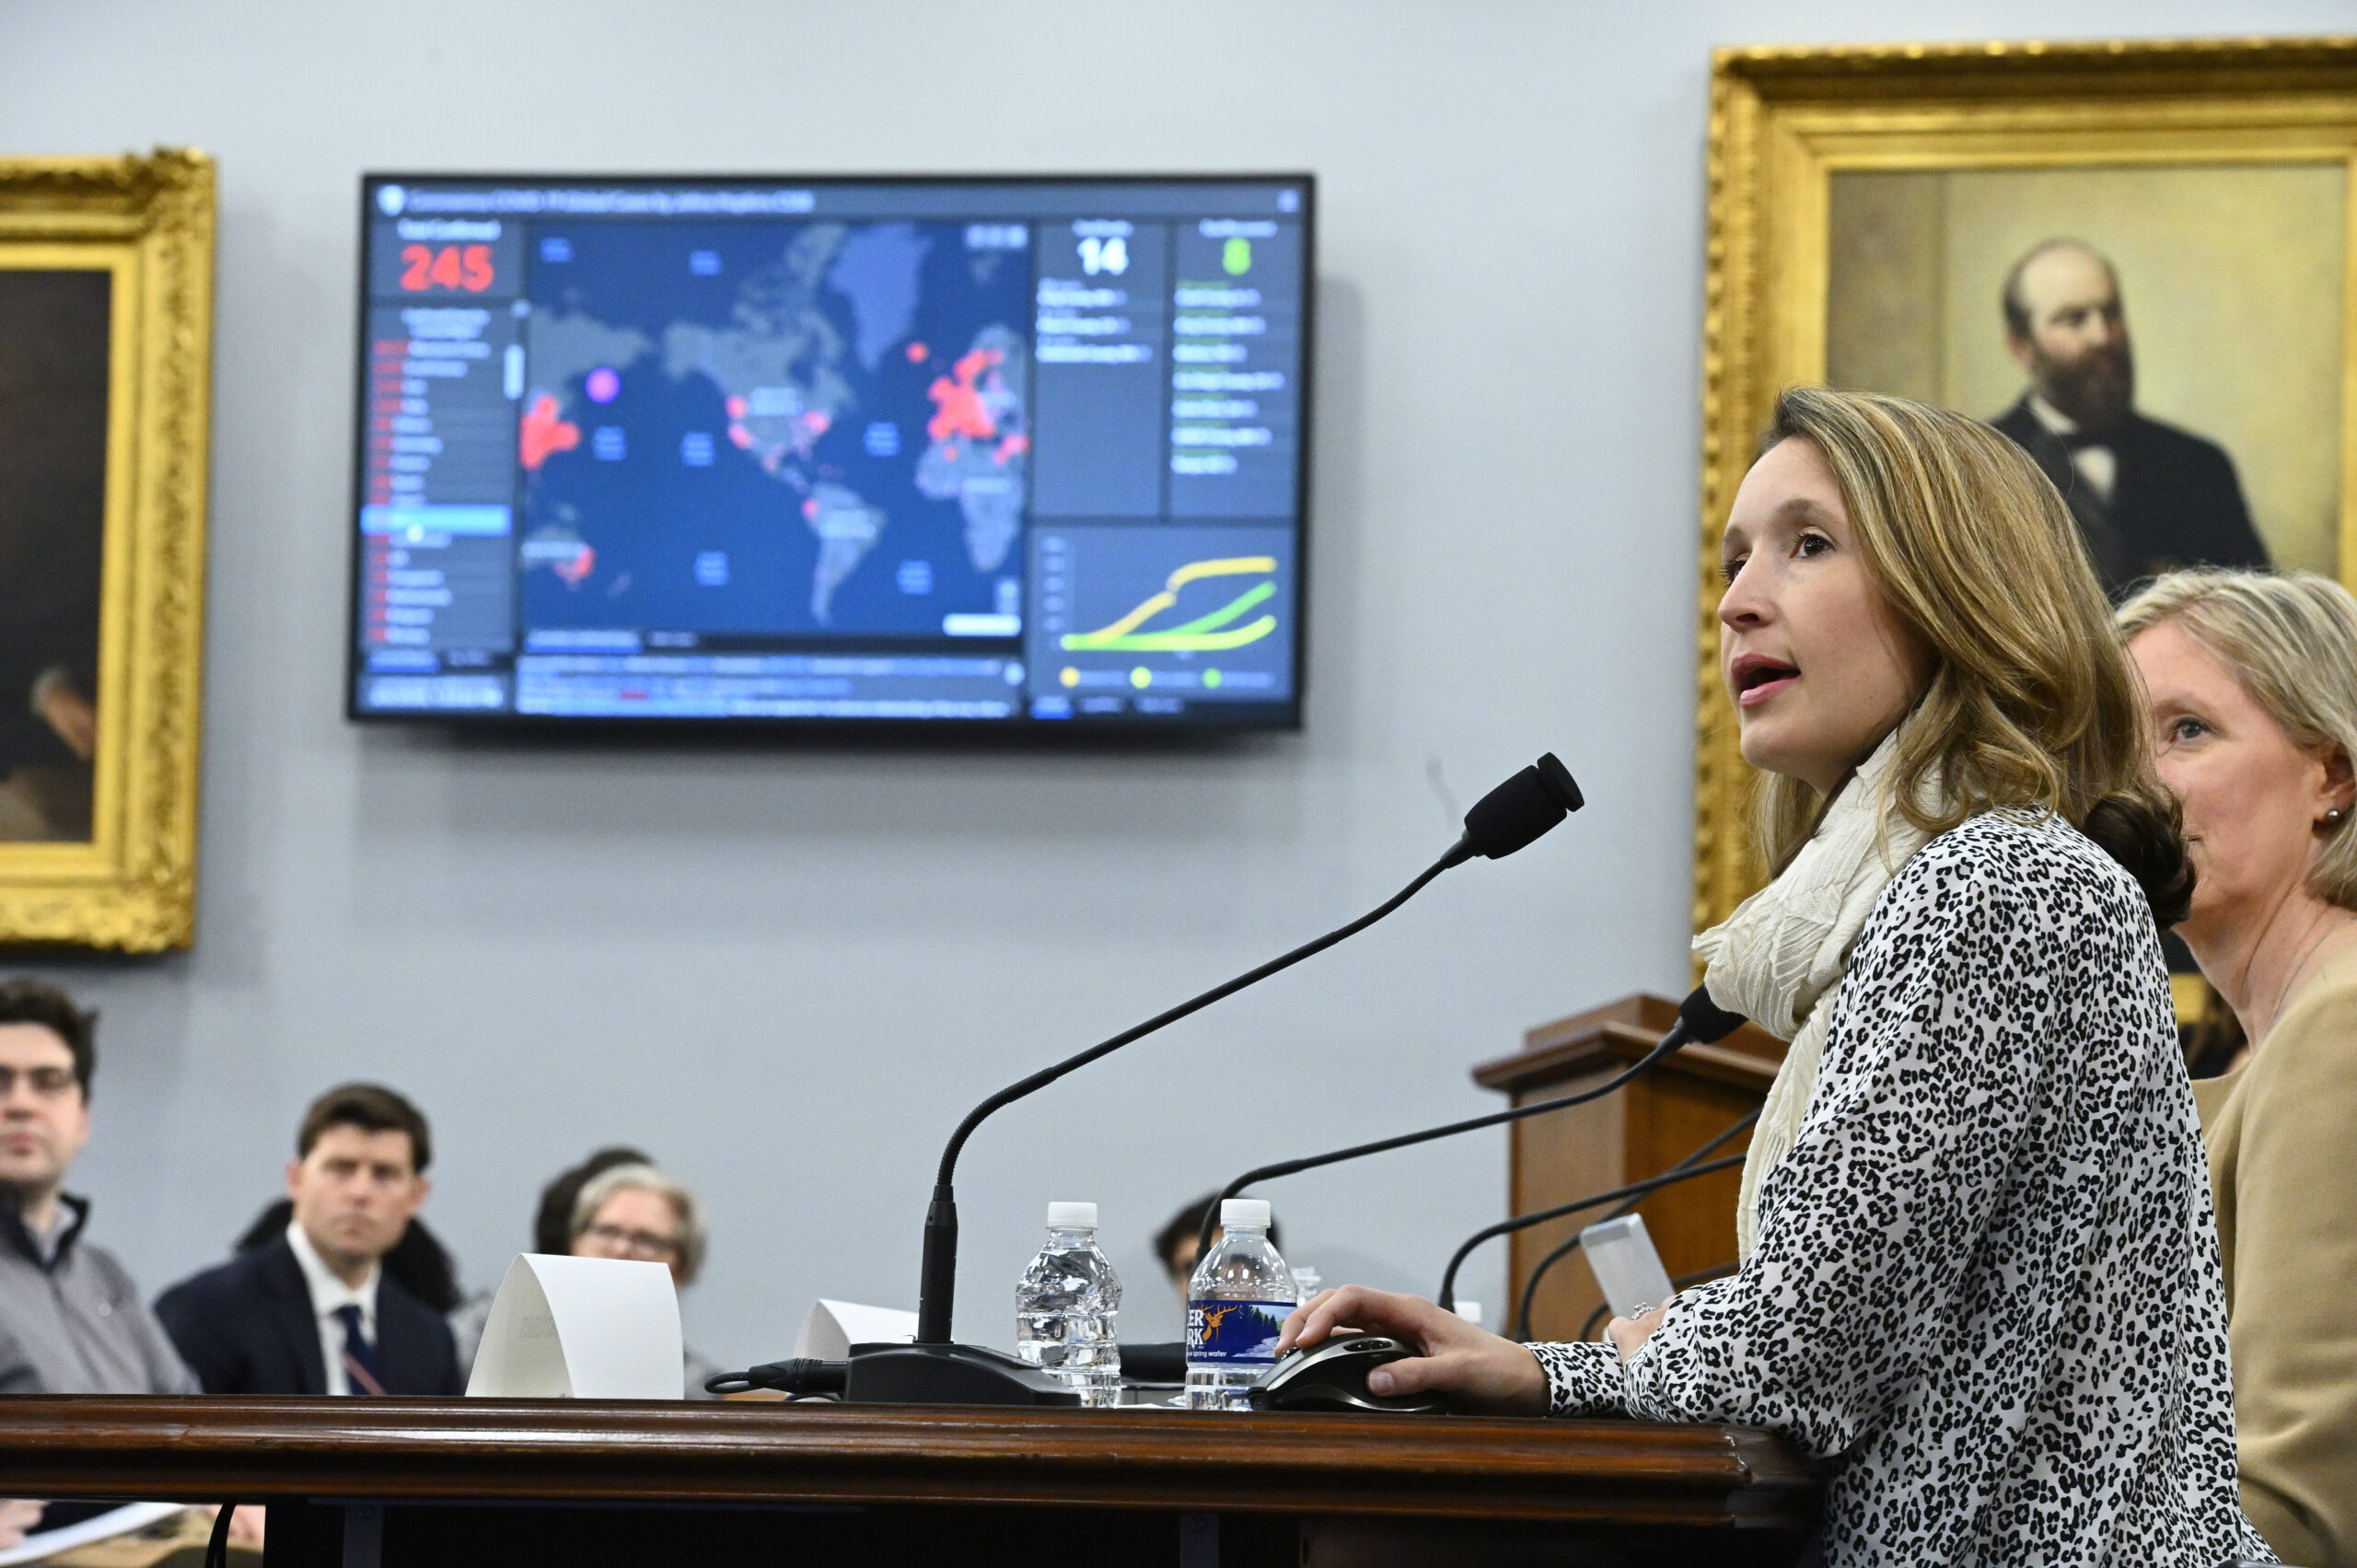 Lauren Gardner attended a briefing in Washington, D.C., for congressional staff on the progression of the pandemic and her team's efforts to track real time data.